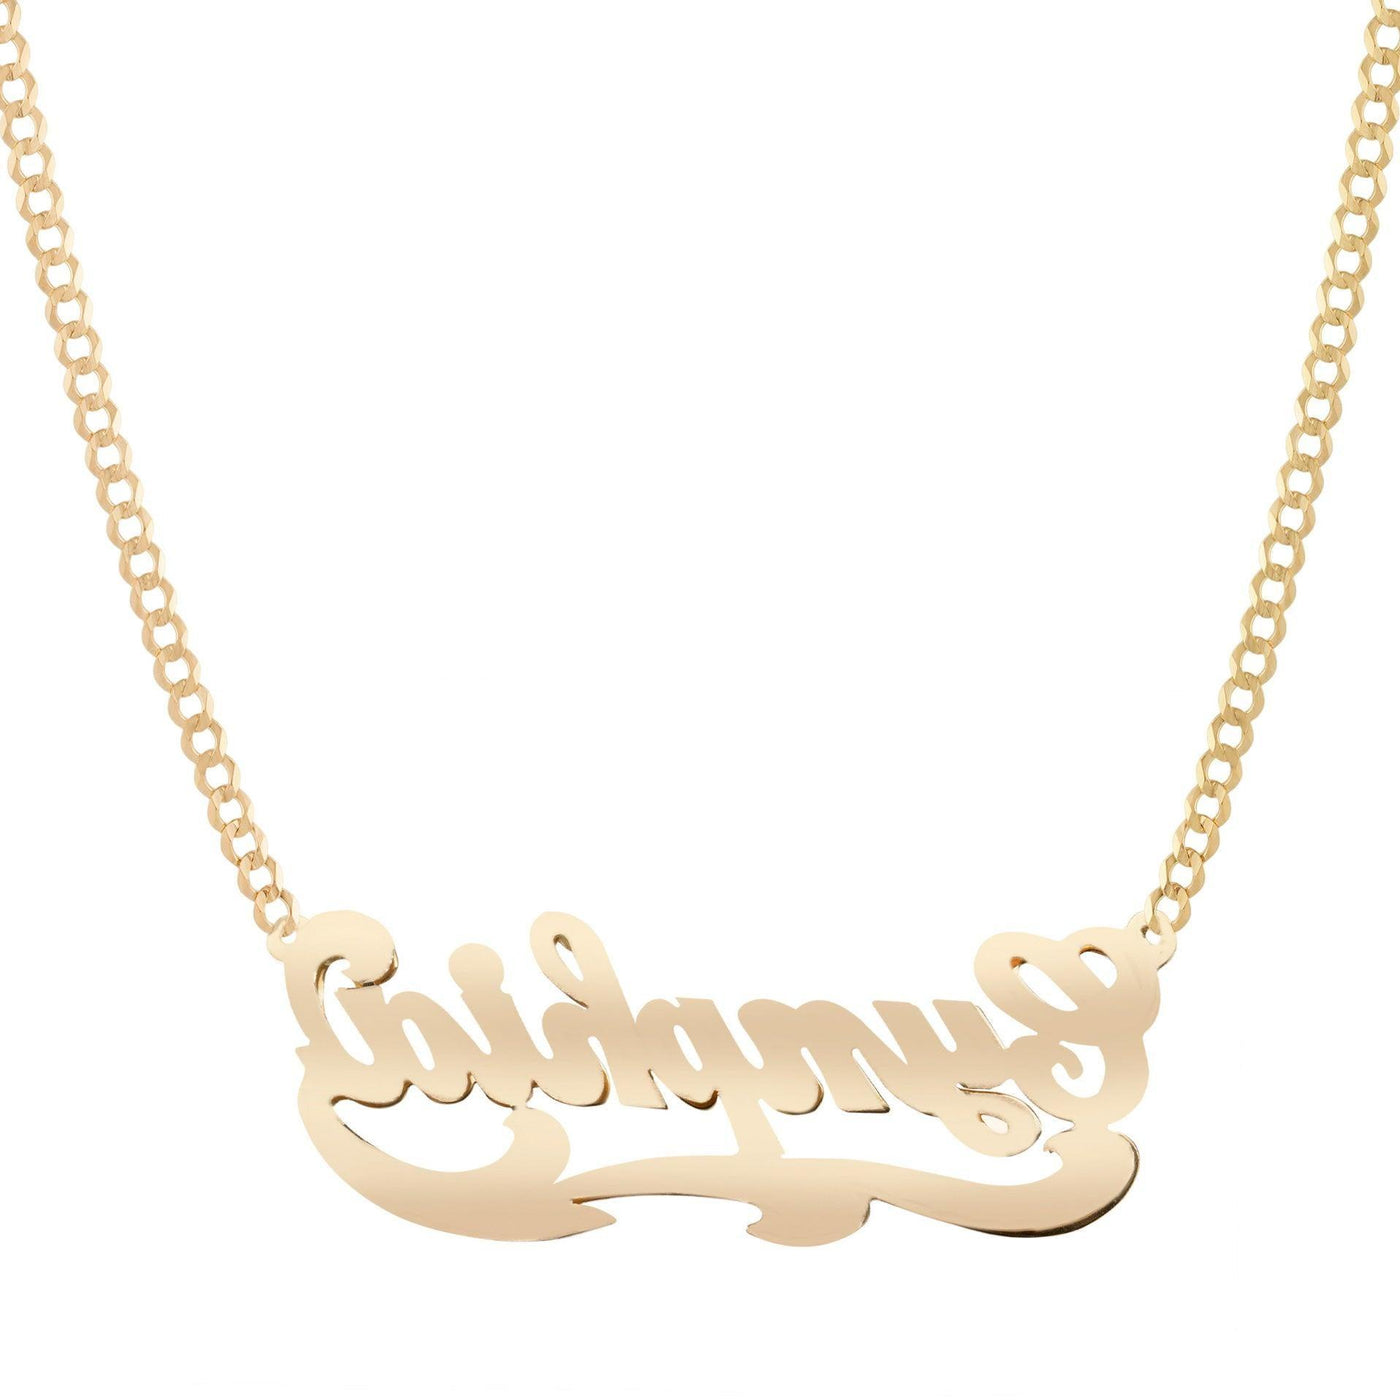 Ladies Script Name Plate Necklace 14K Gold - Style 43 - bayamjewelry